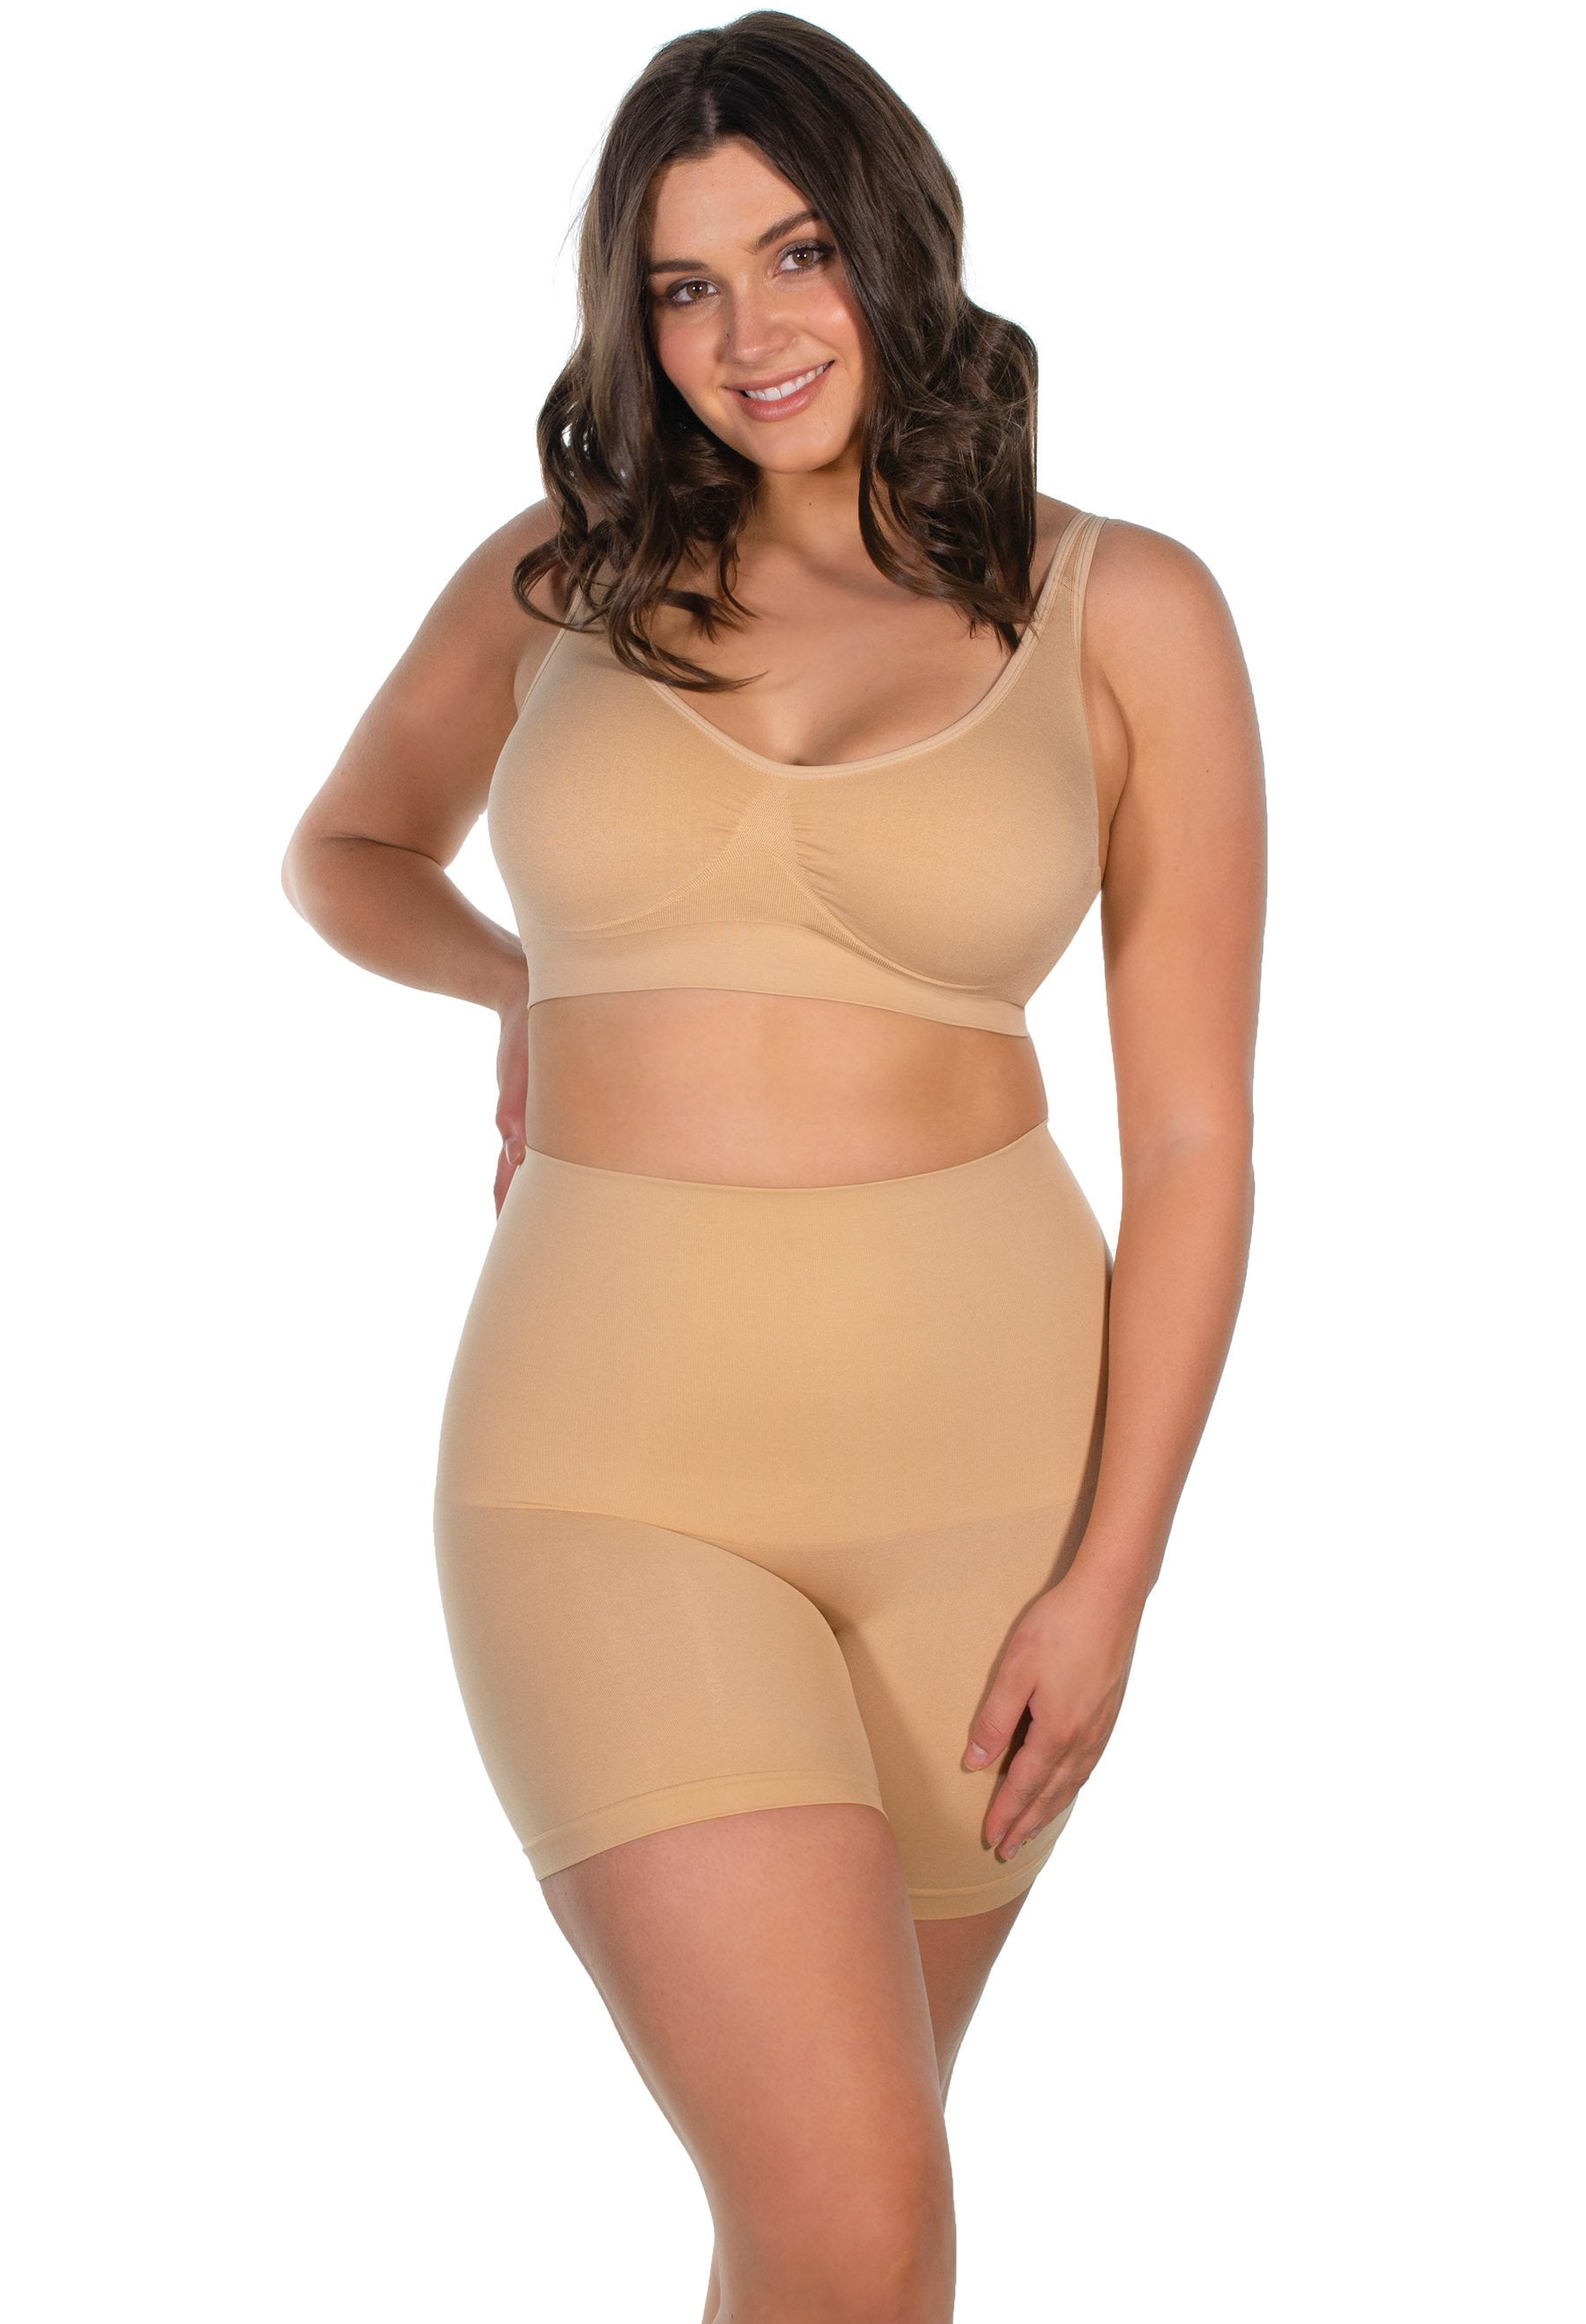 Short Power Net Girdle with Removable Straps - Smooth and Slim